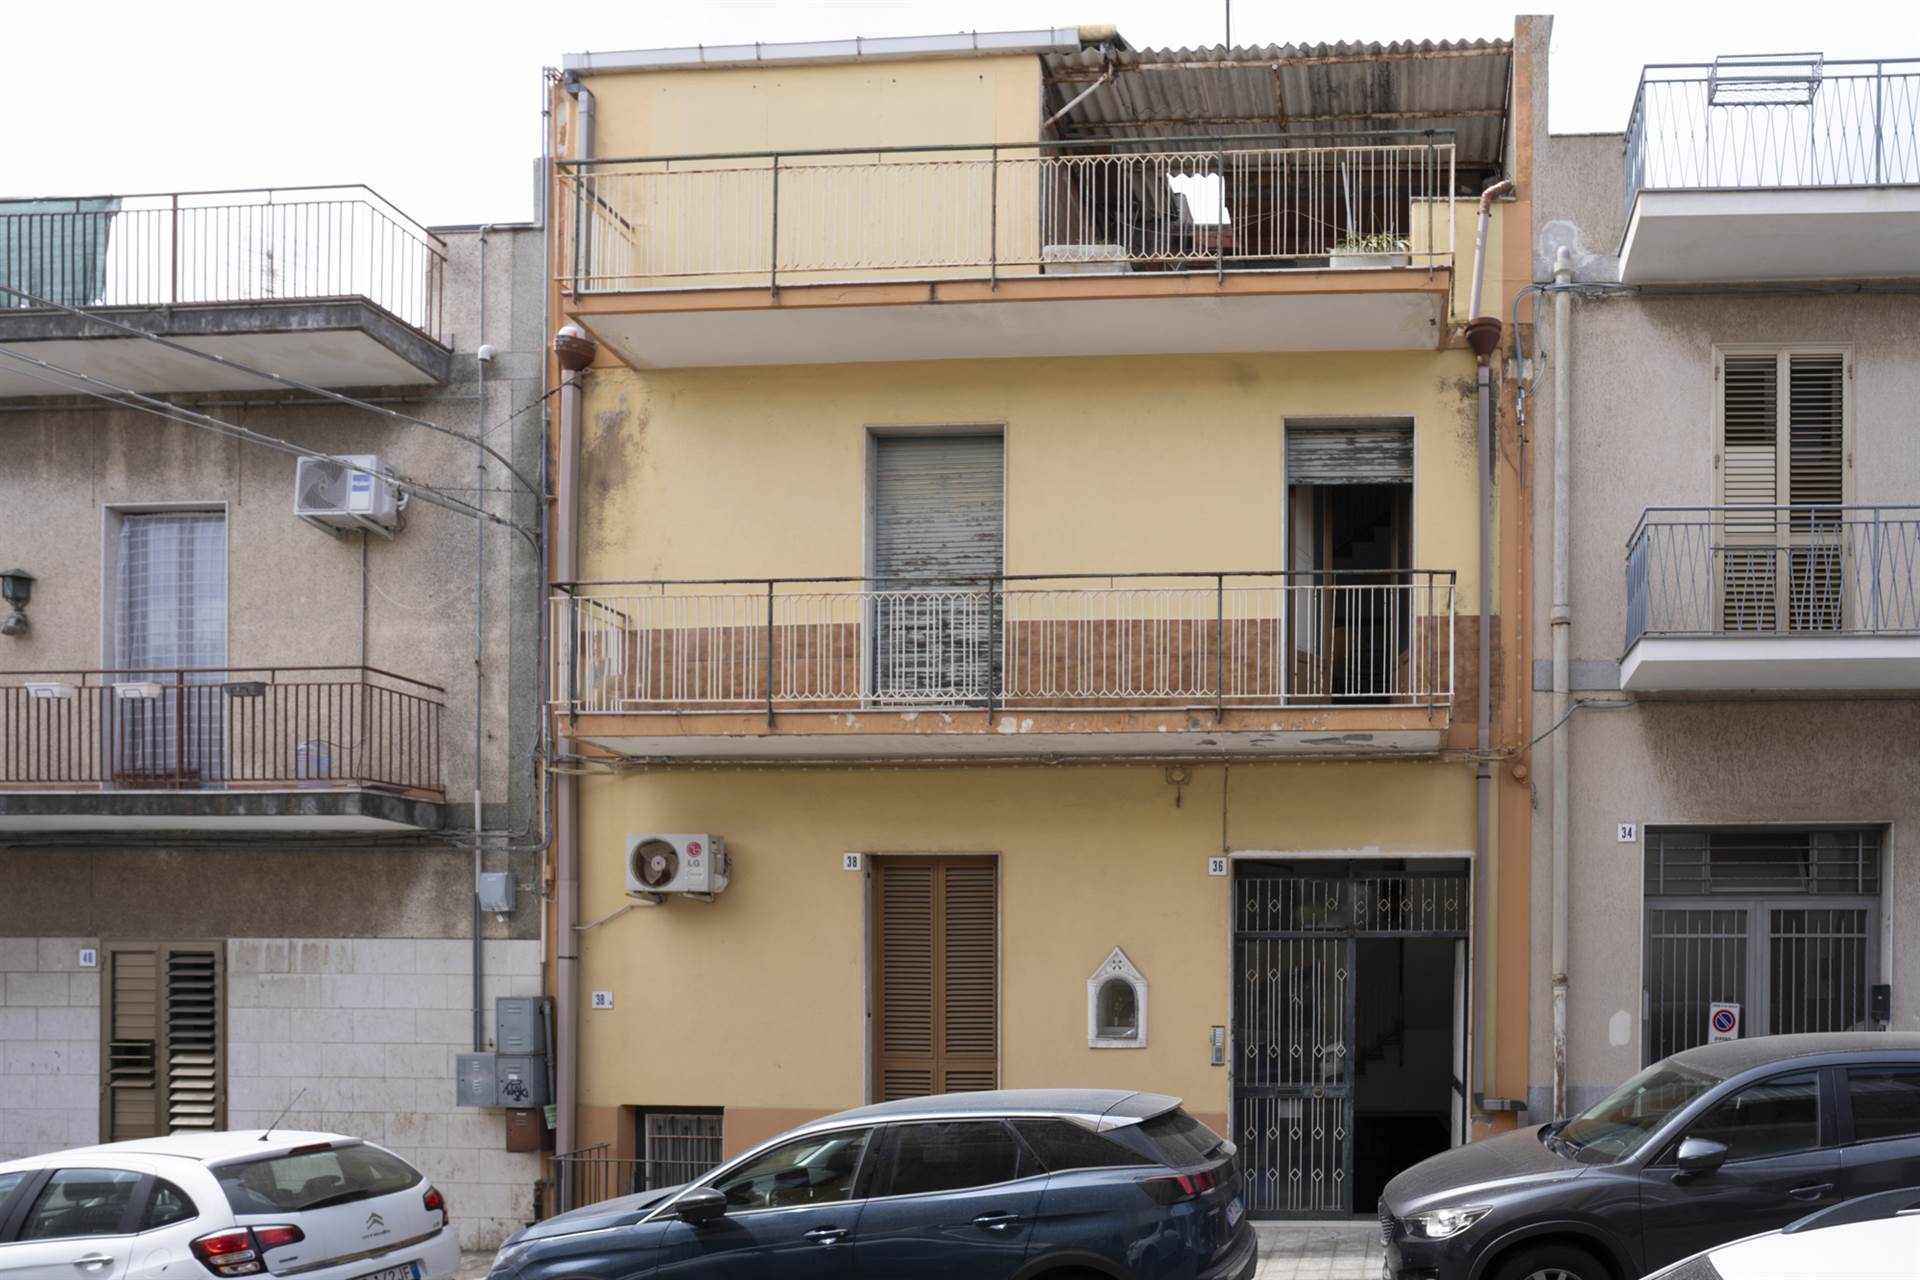 CANNIZZARO, ACI CASTELLO, Terraced house for sale of 211 Sq. mt., Be restored, Heating Non-existent, Energetic class: D, Epi: 84,1 kwh/m2 year, 